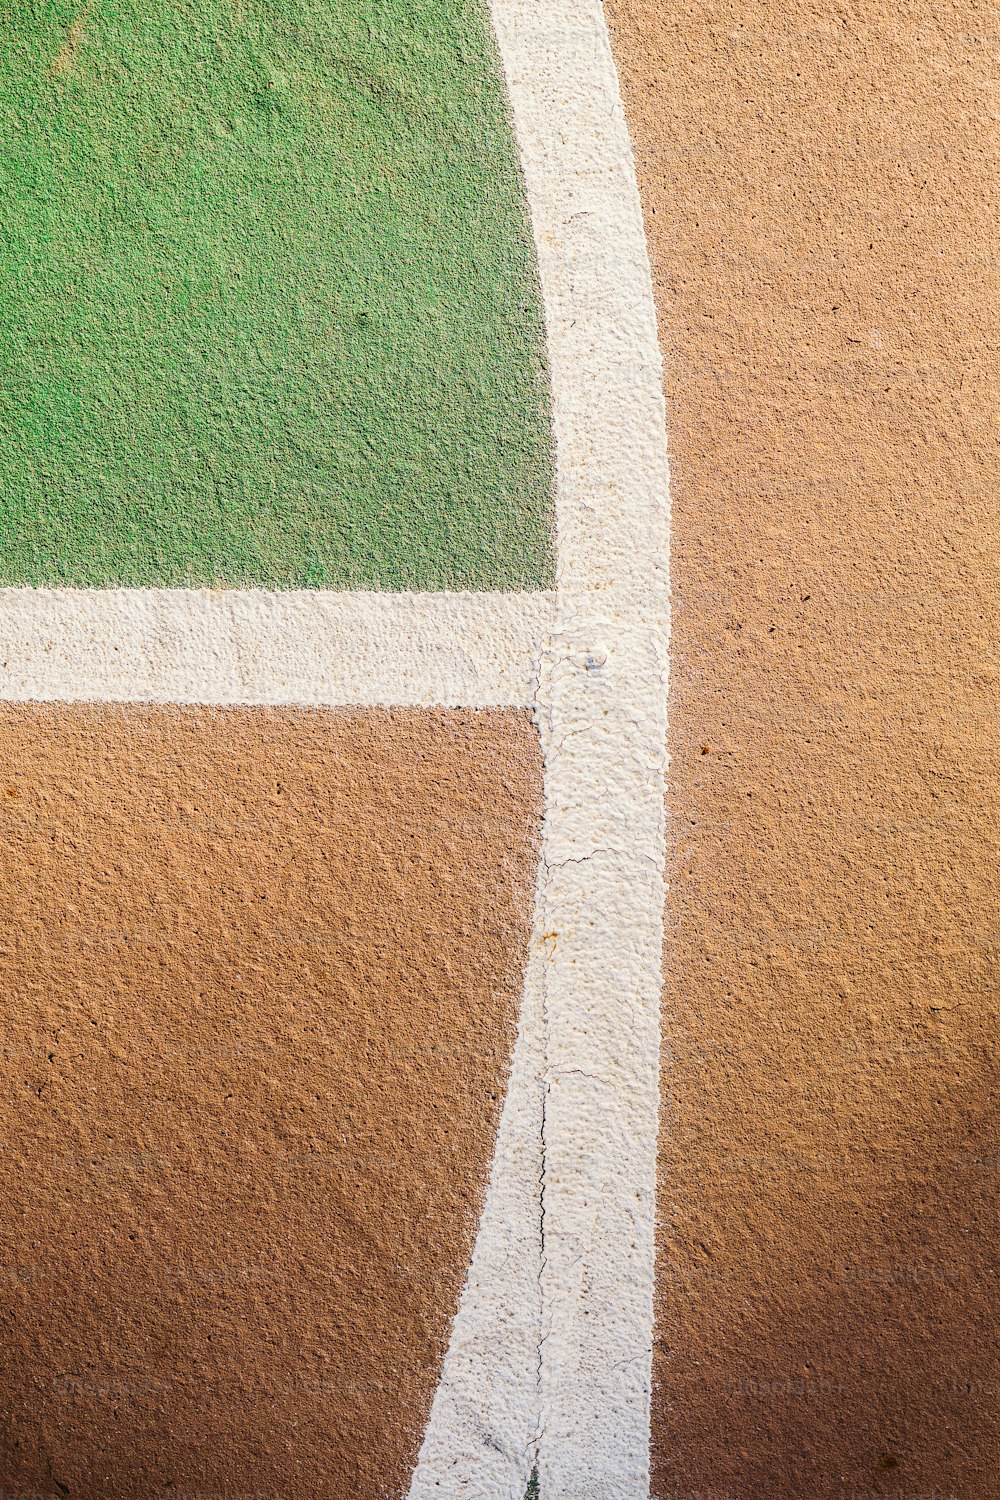 a close up of a baseball field with grass and dirt